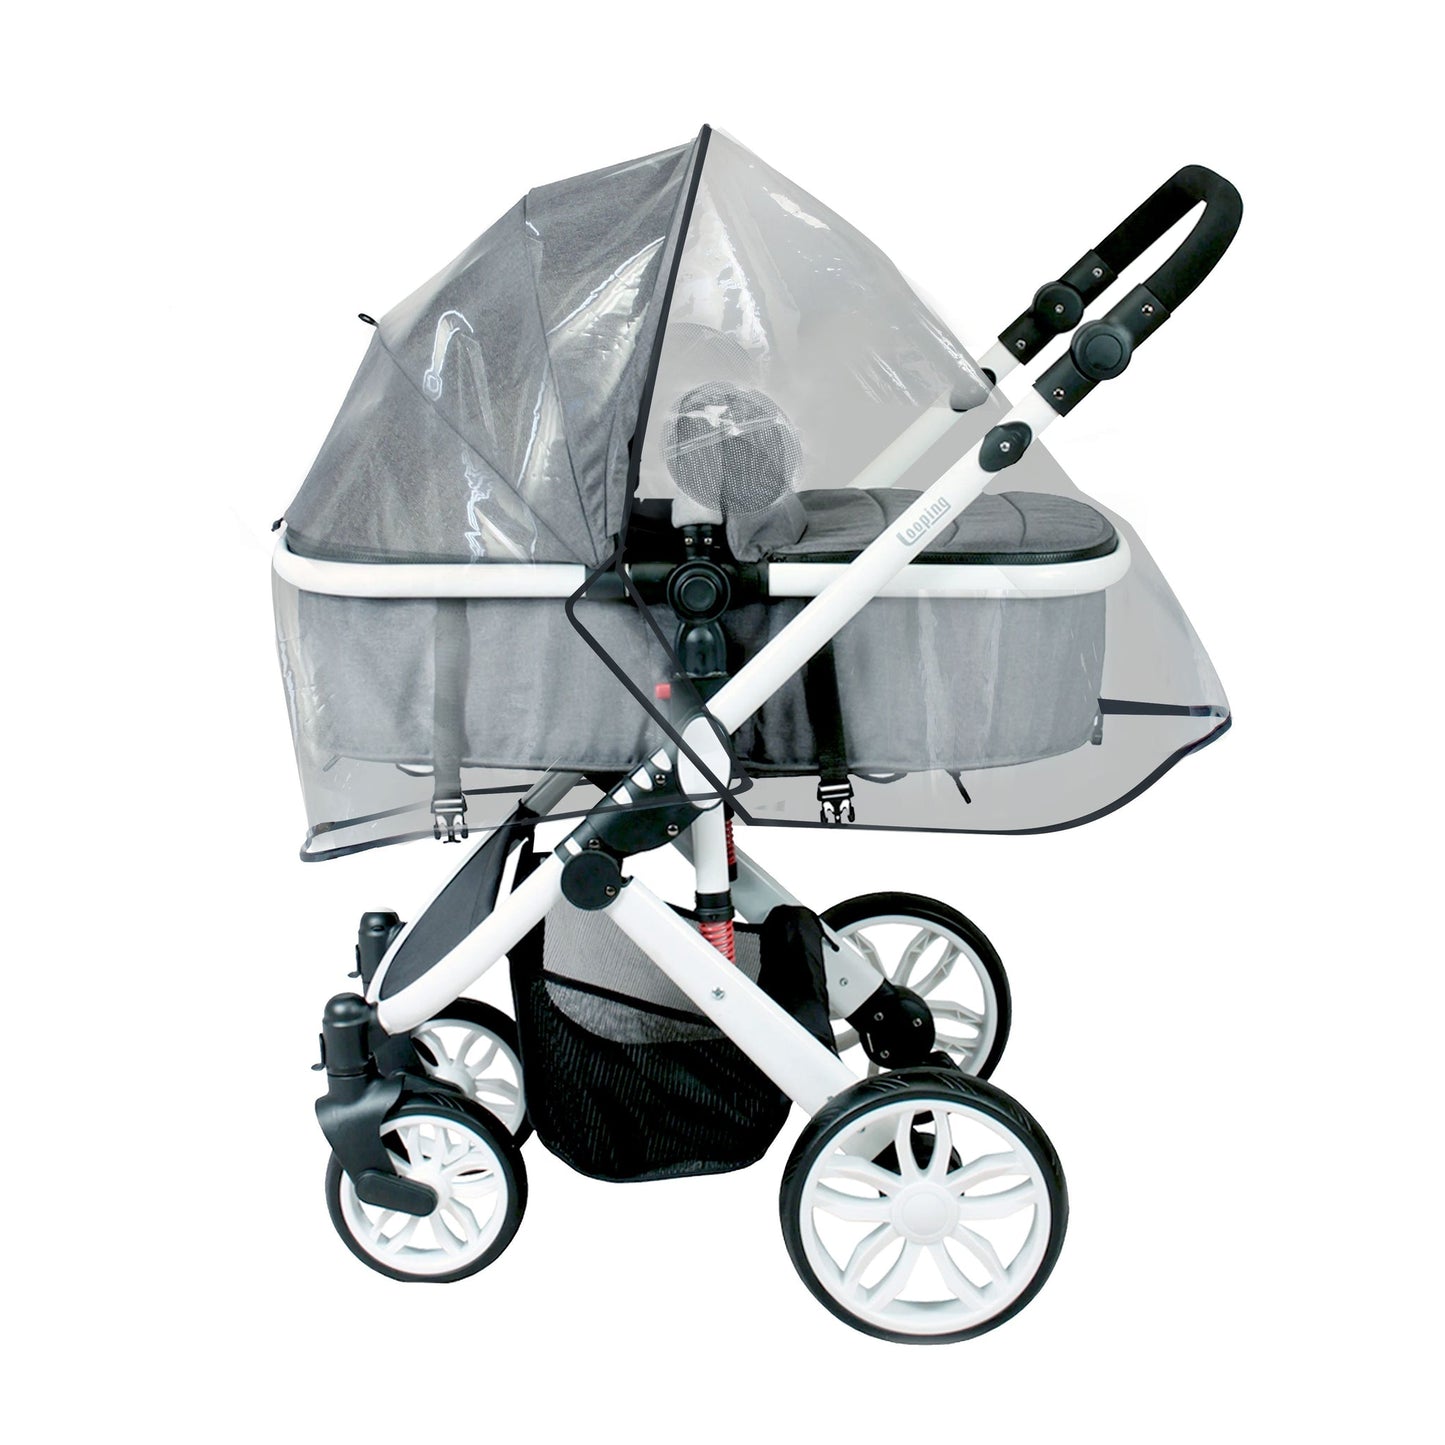 Looping Squizz and Sydney Stroller Raincover